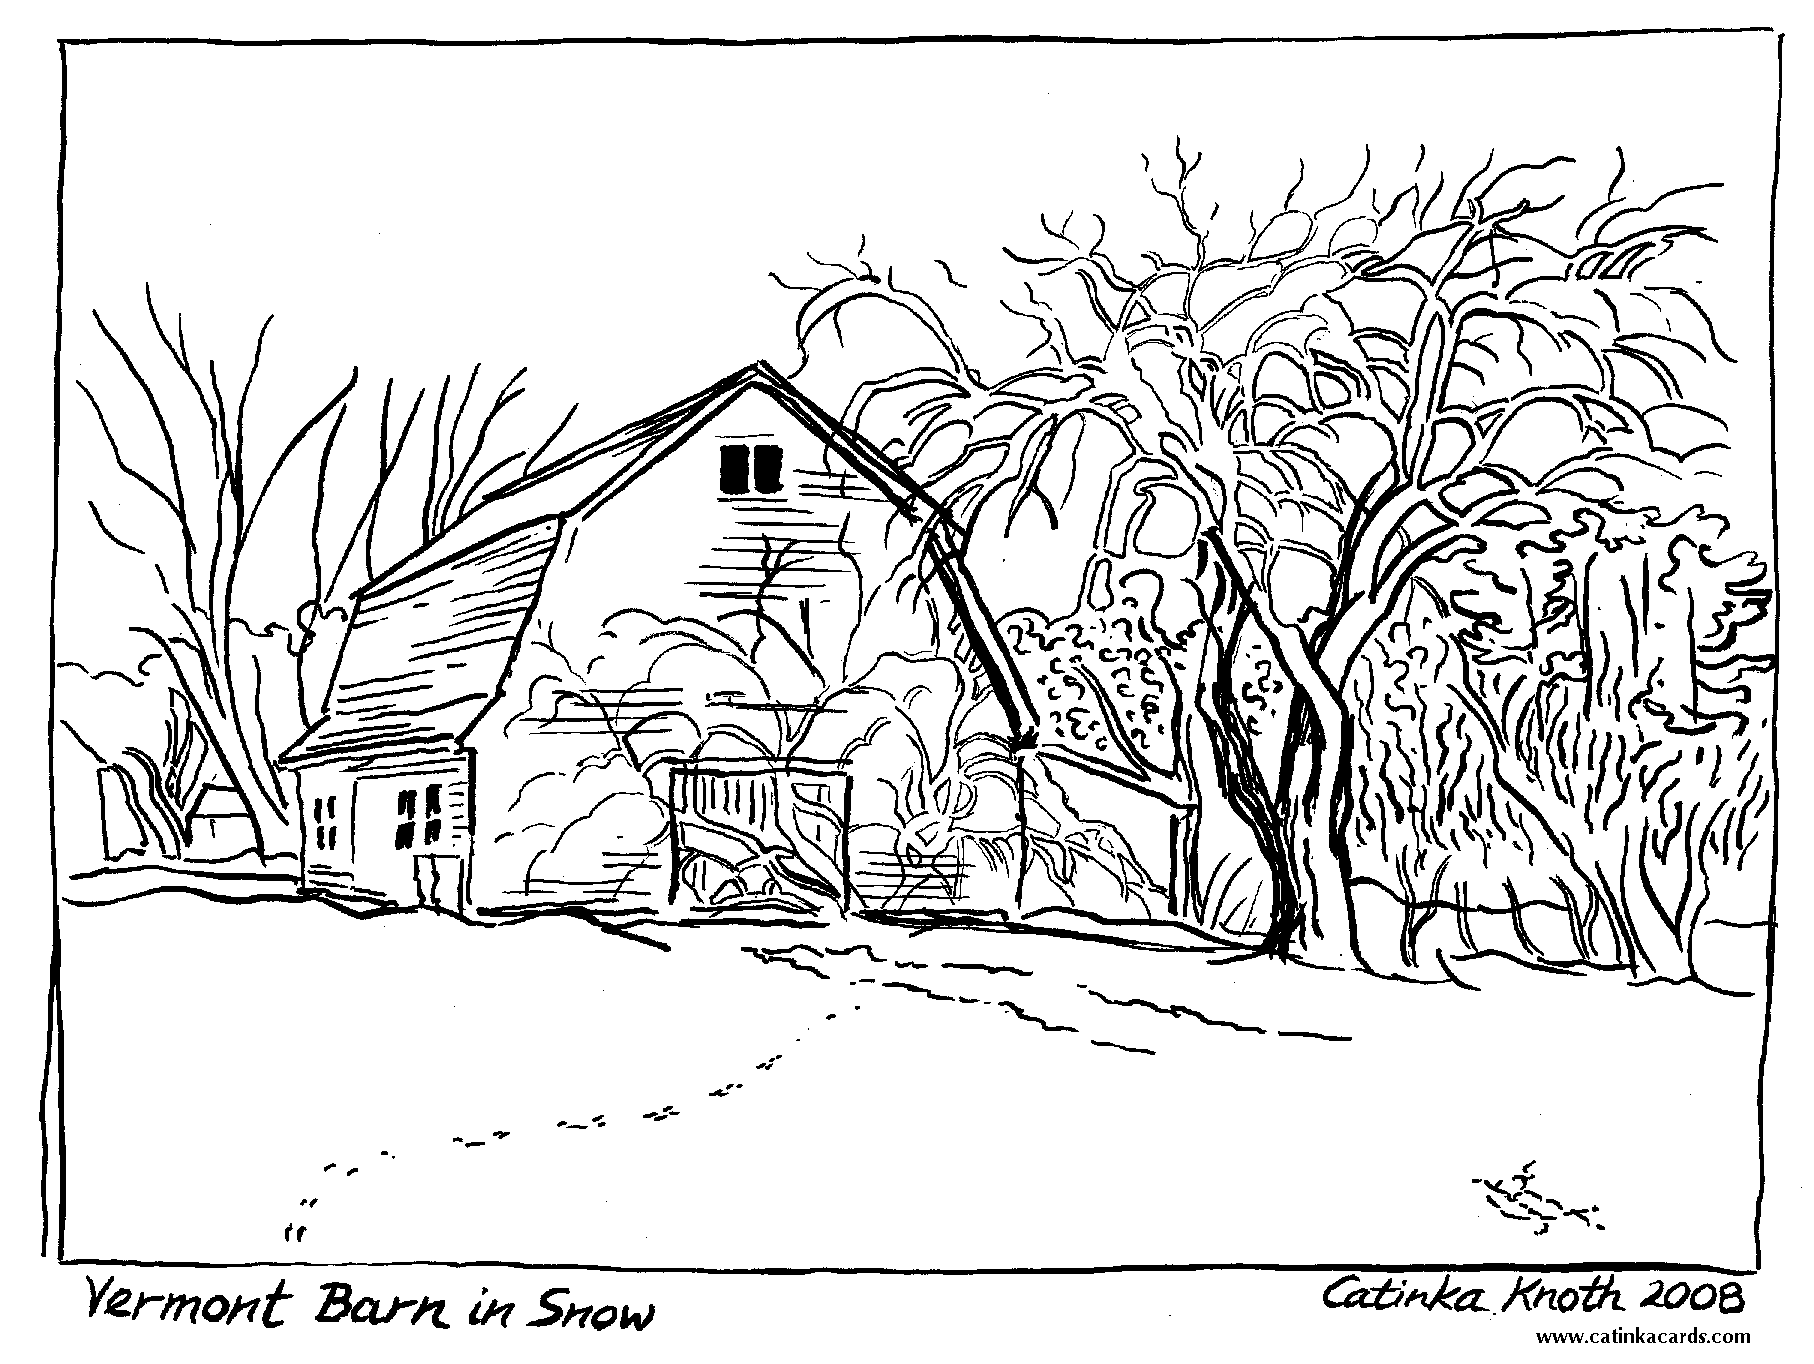 Nature Around The House Coloring Pages - Coloring Home